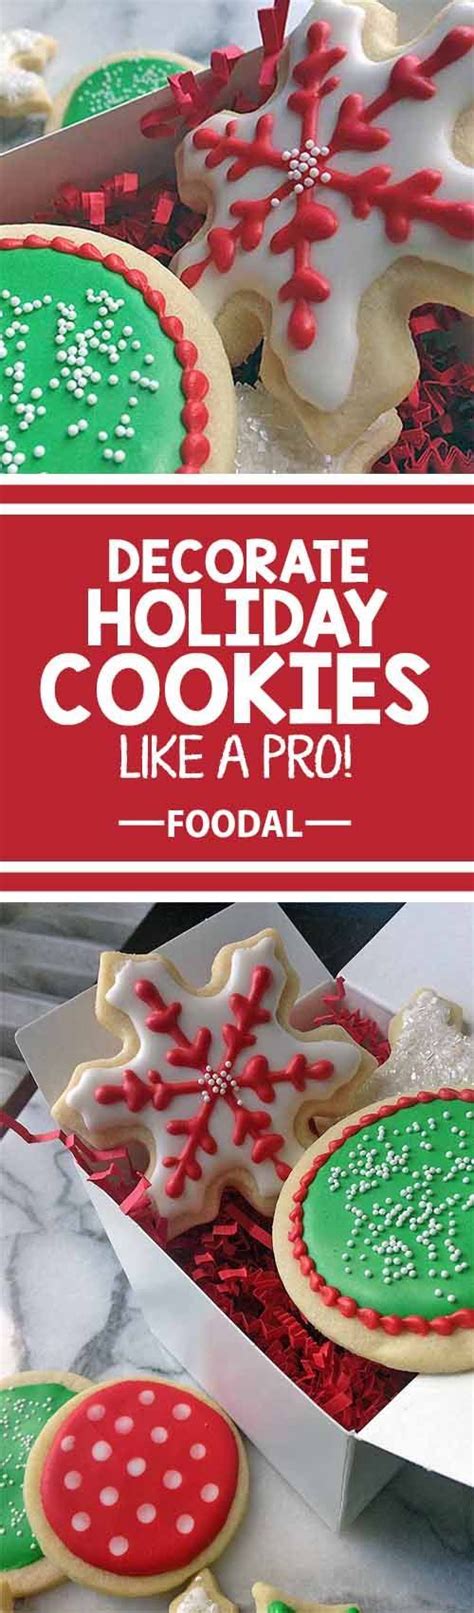 See more ideas about cookie decorating, sugar cookies decorated, royal icing cookies. Royal Icing | Recipe | Christmas treats, Xmas cookies, Holiday cookies